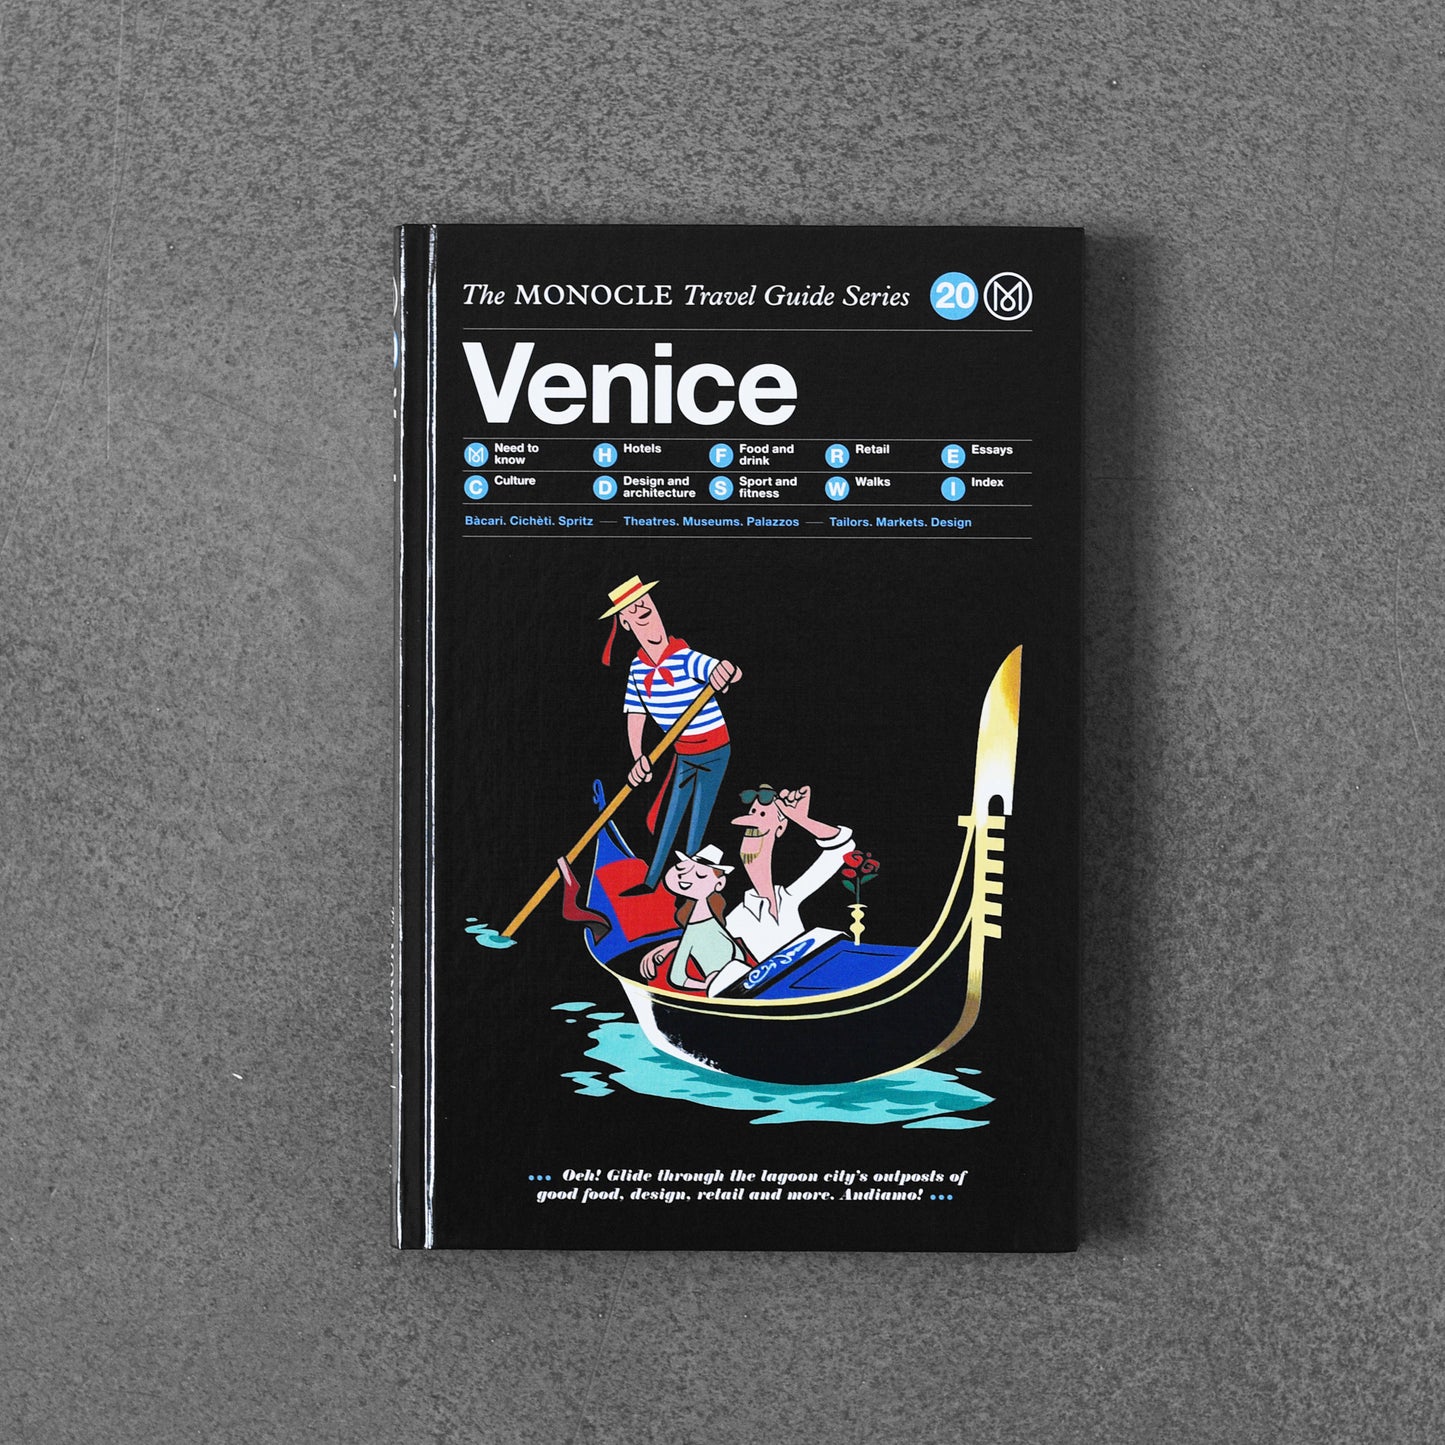 The Monocle Travel Guide Series Venice